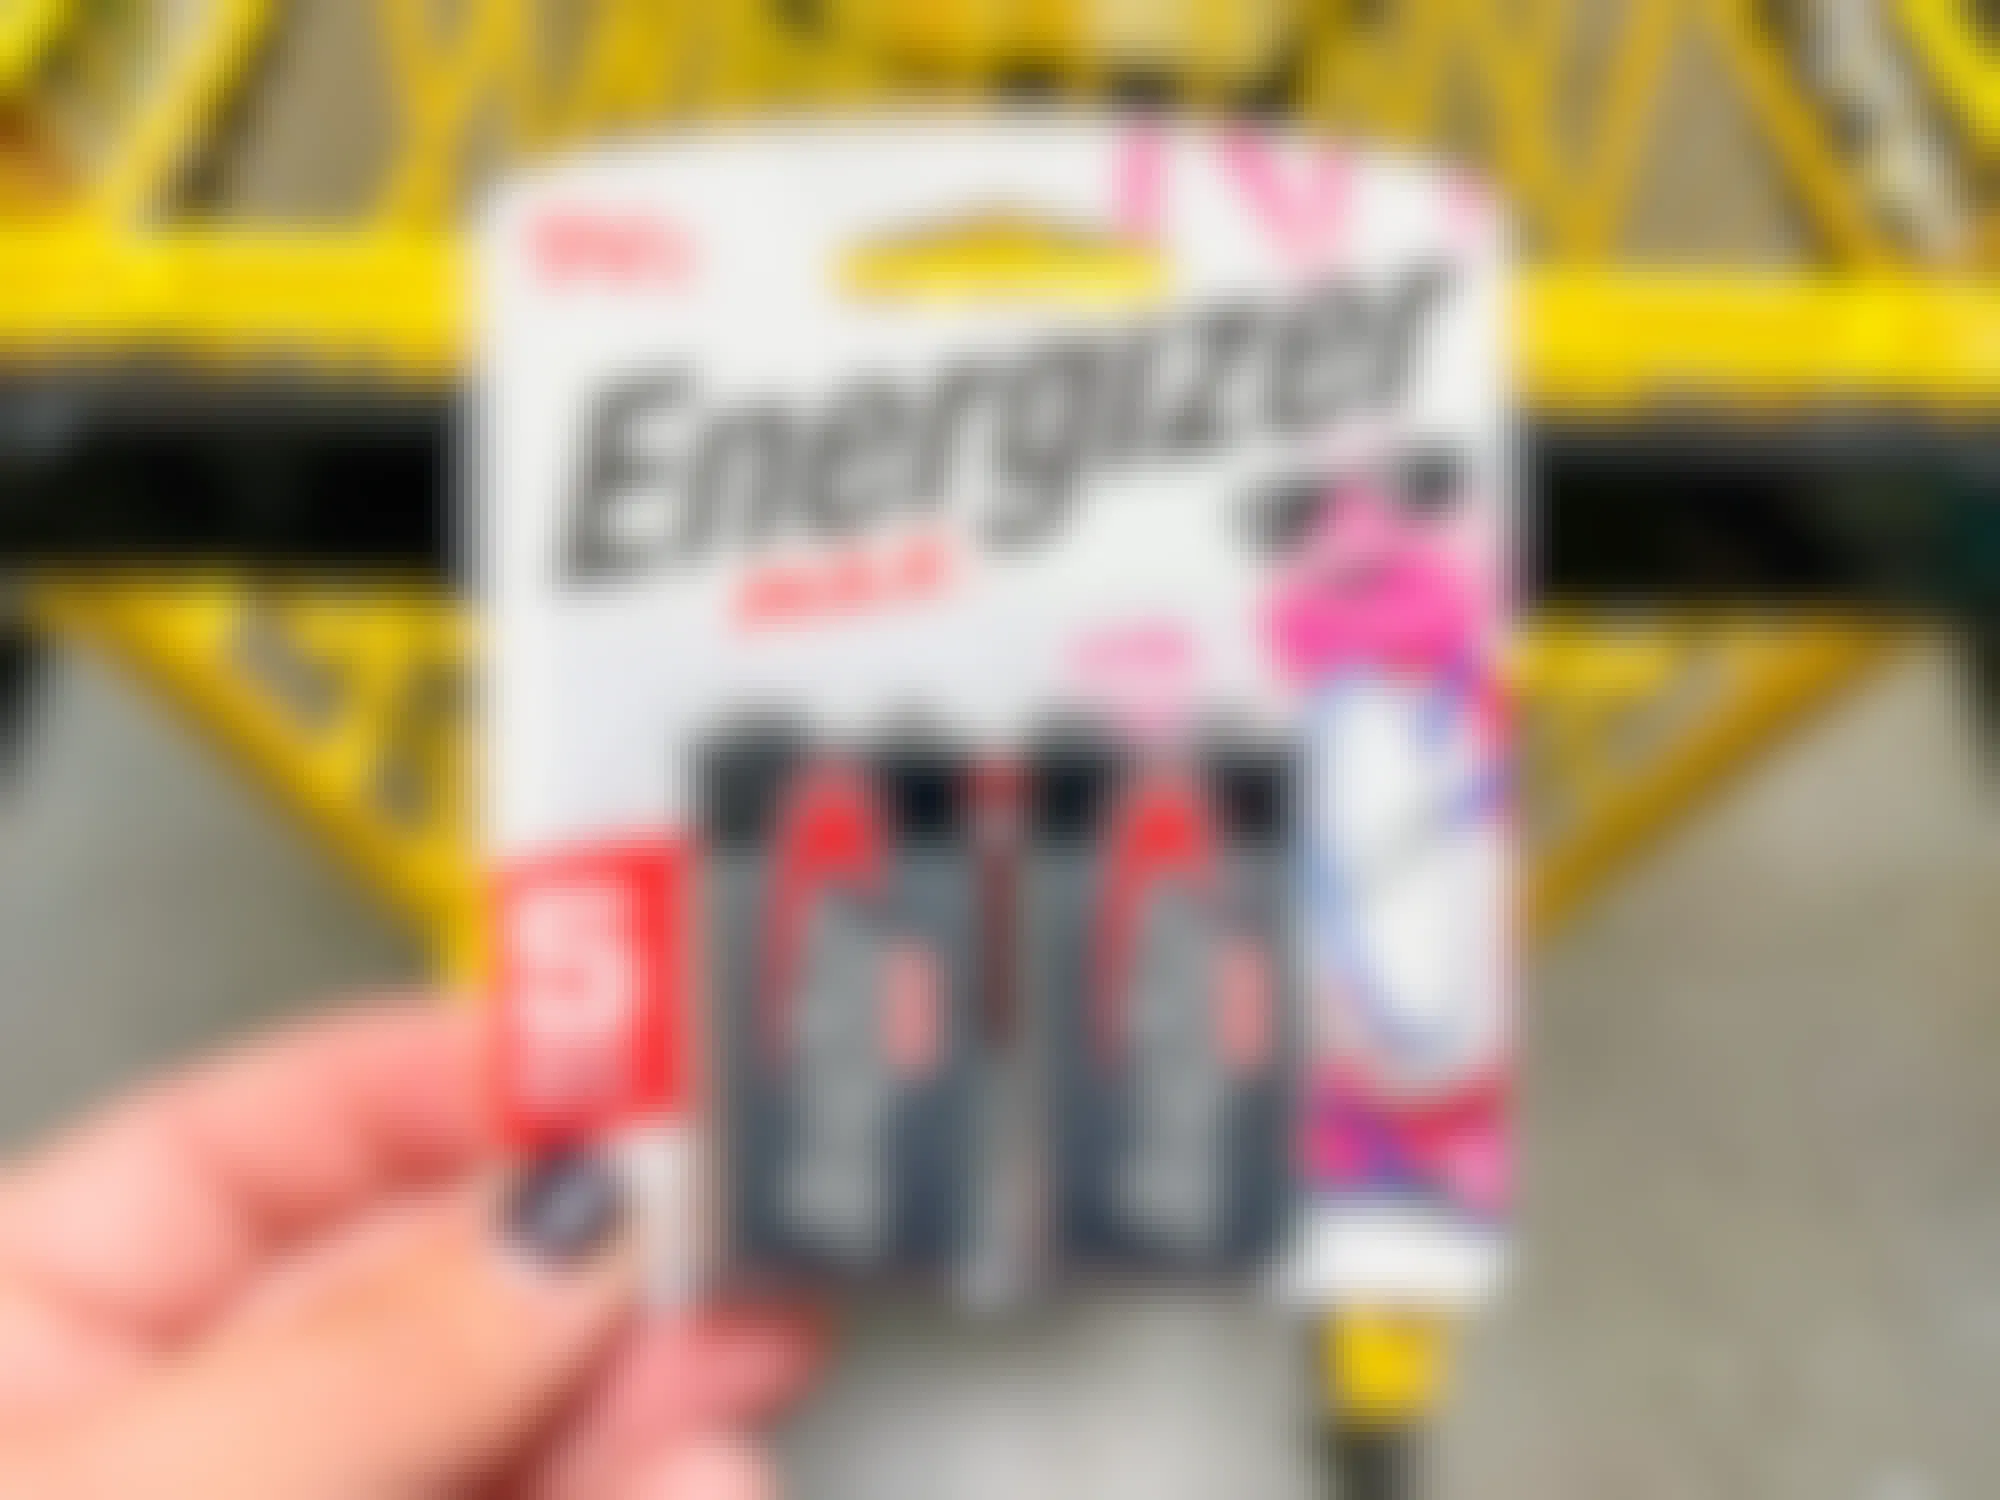 Someone holding a pack of Energizer batteries next to a Dollar General shopping cart